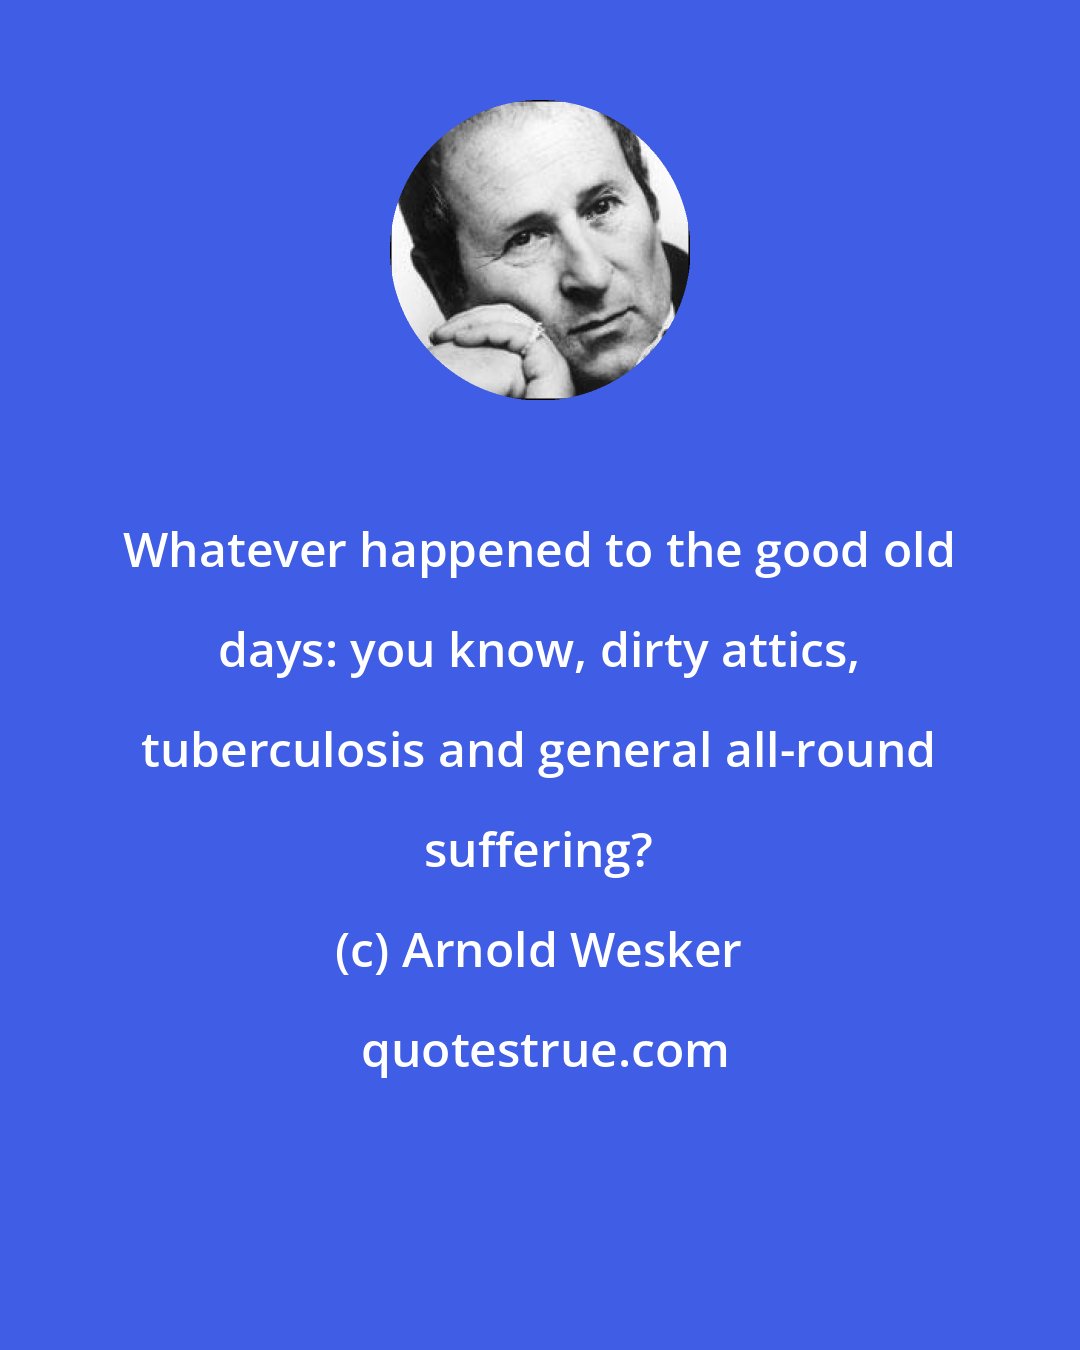 Arnold Wesker: Whatever happened to the good old days: you know, dirty attics, tuberculosis and general all-round suffering?